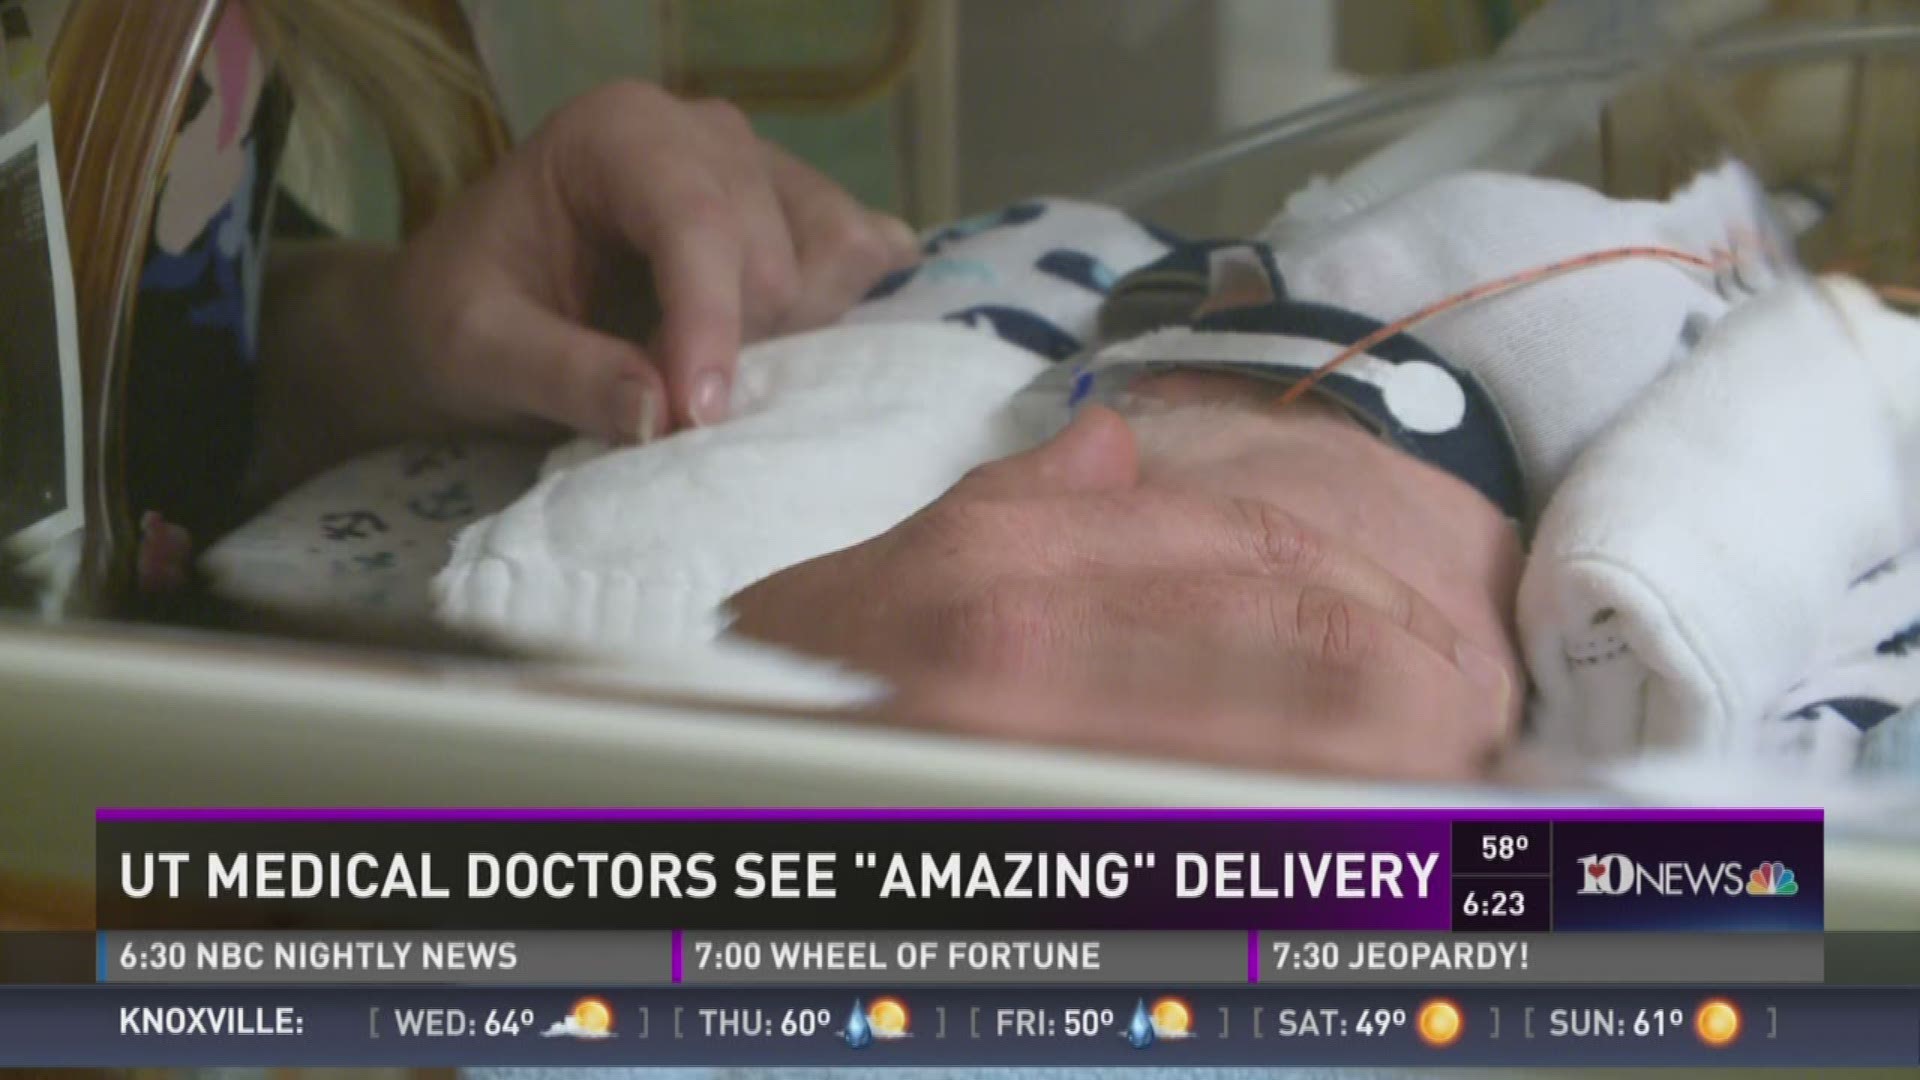 10News reporter Mary Scott has more on a set of twins born weeks apart.